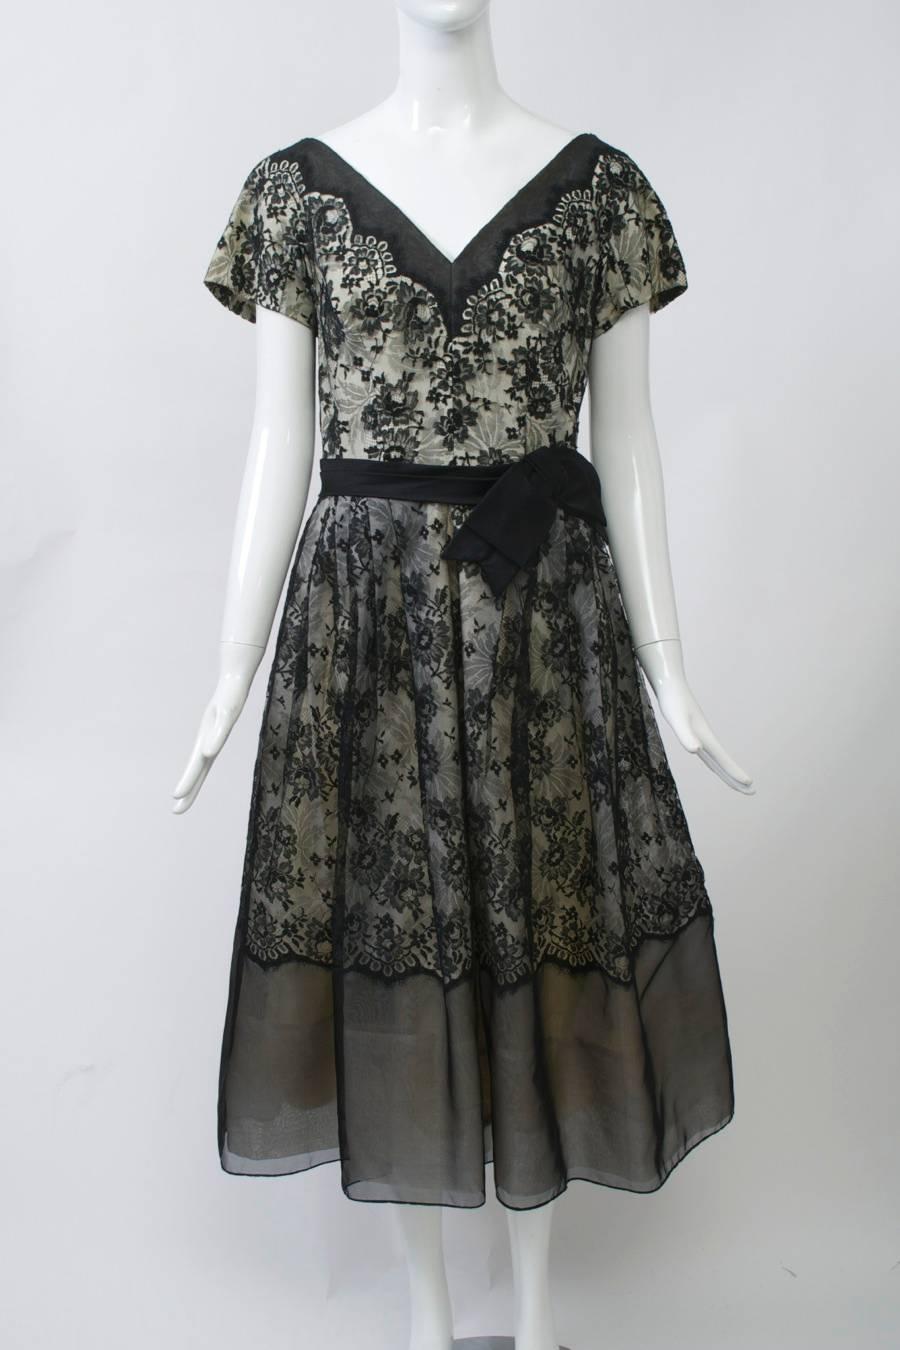 Black lace and organza dress over a white lining features a fitted bodice and full skirt, short sleeves, V neck front and back, and a black waist sash with bow. The edges of the lace are scalloped and trimmed with sheer organza at the hem and